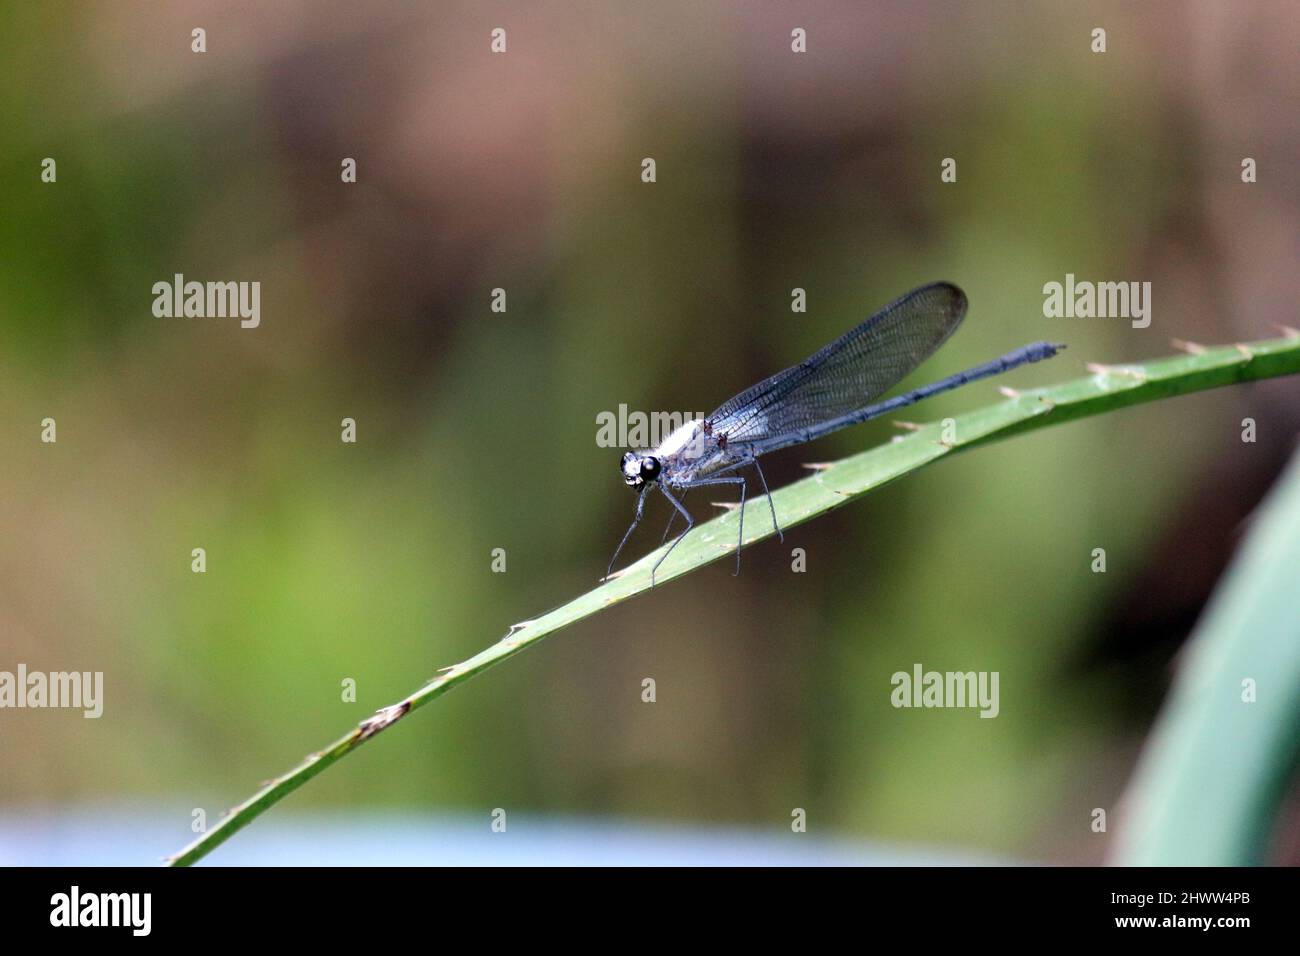 Closeup of a white dragonfly after landing. Its wings are transparent blue. The landing was on a bush beside a river. Stock Photo